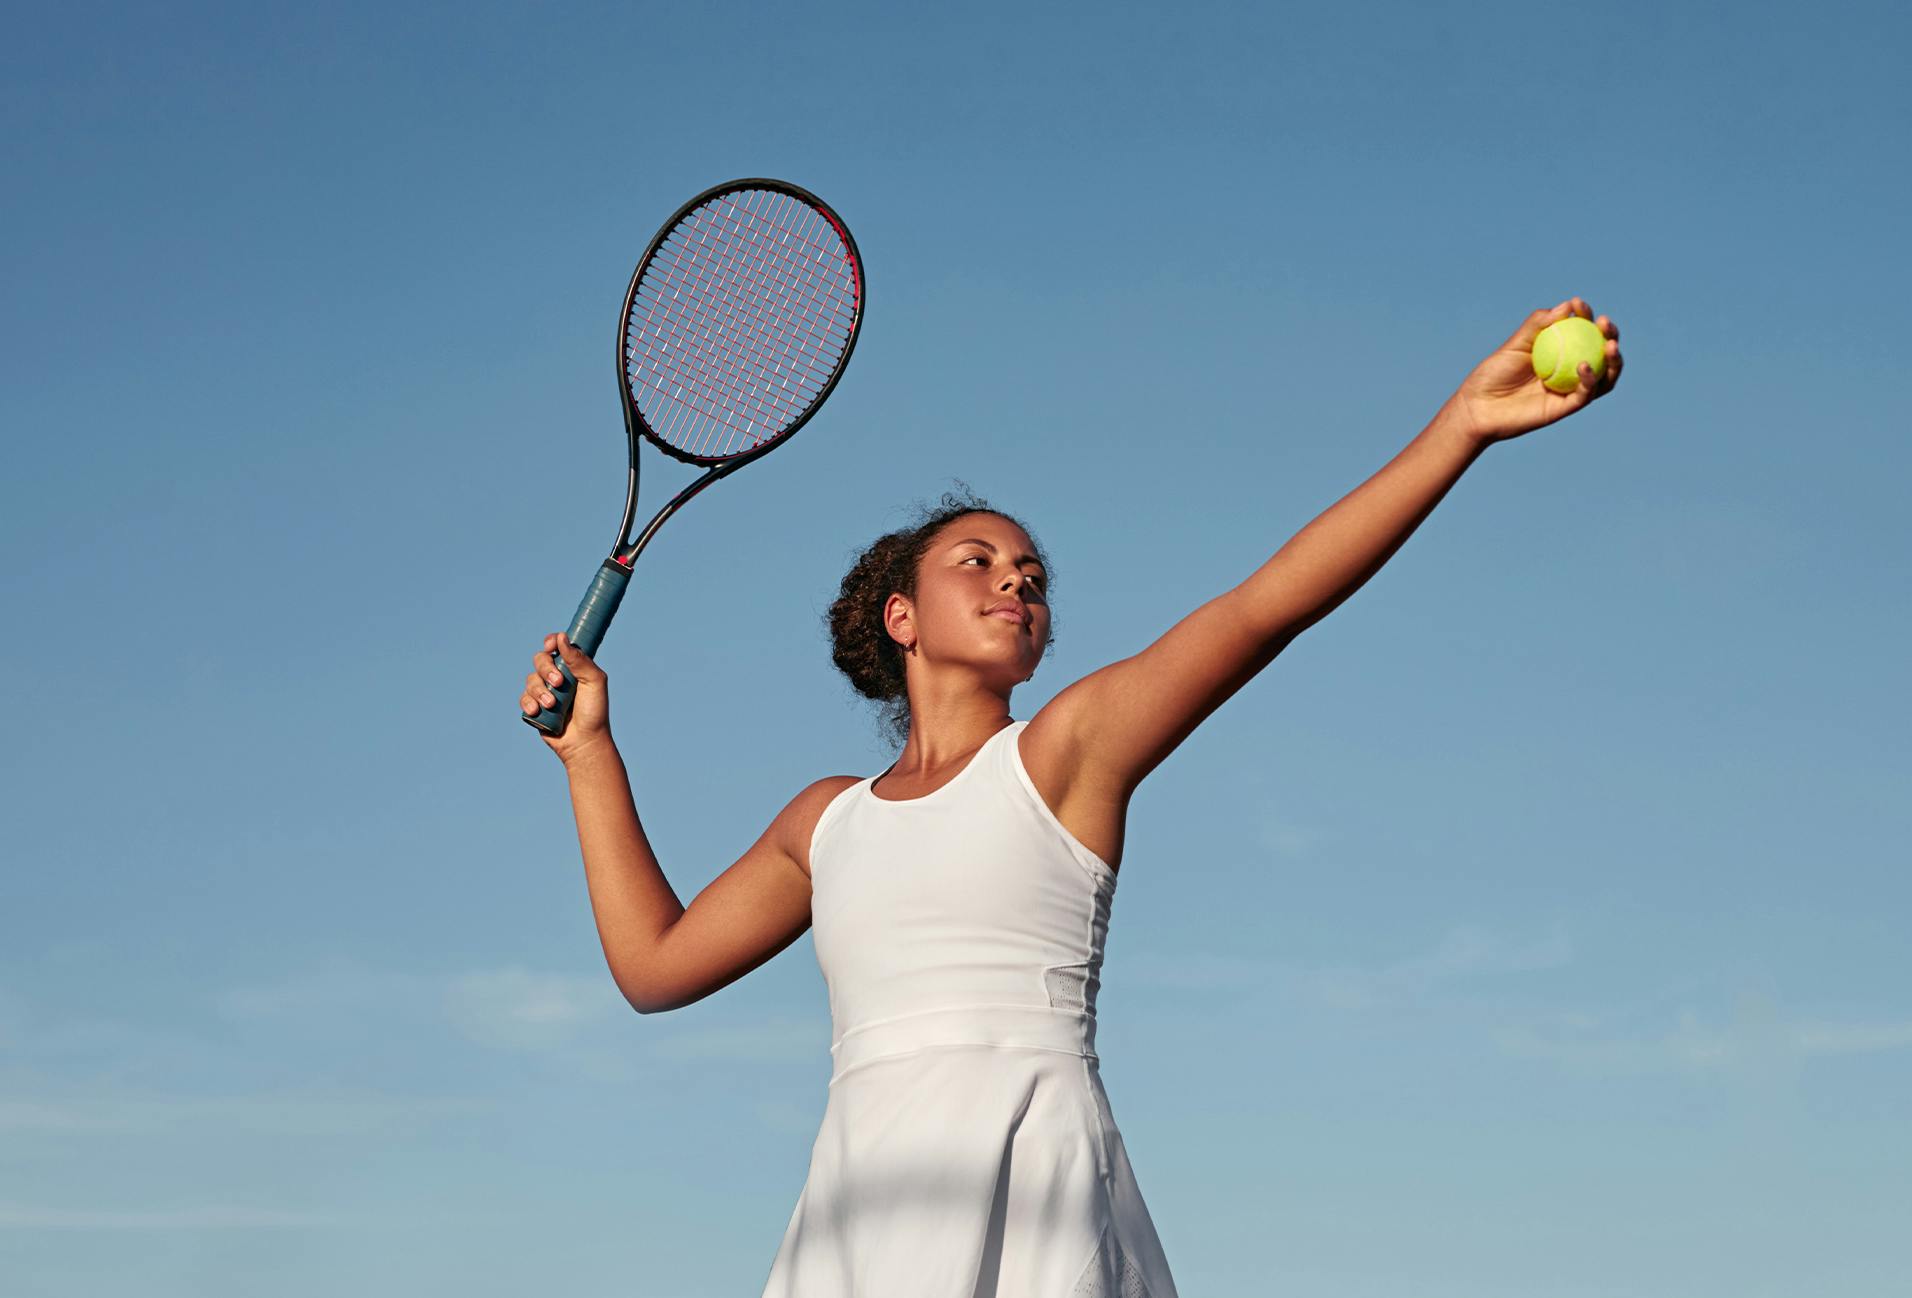 woman in white dress holding tennis racket and ball in air